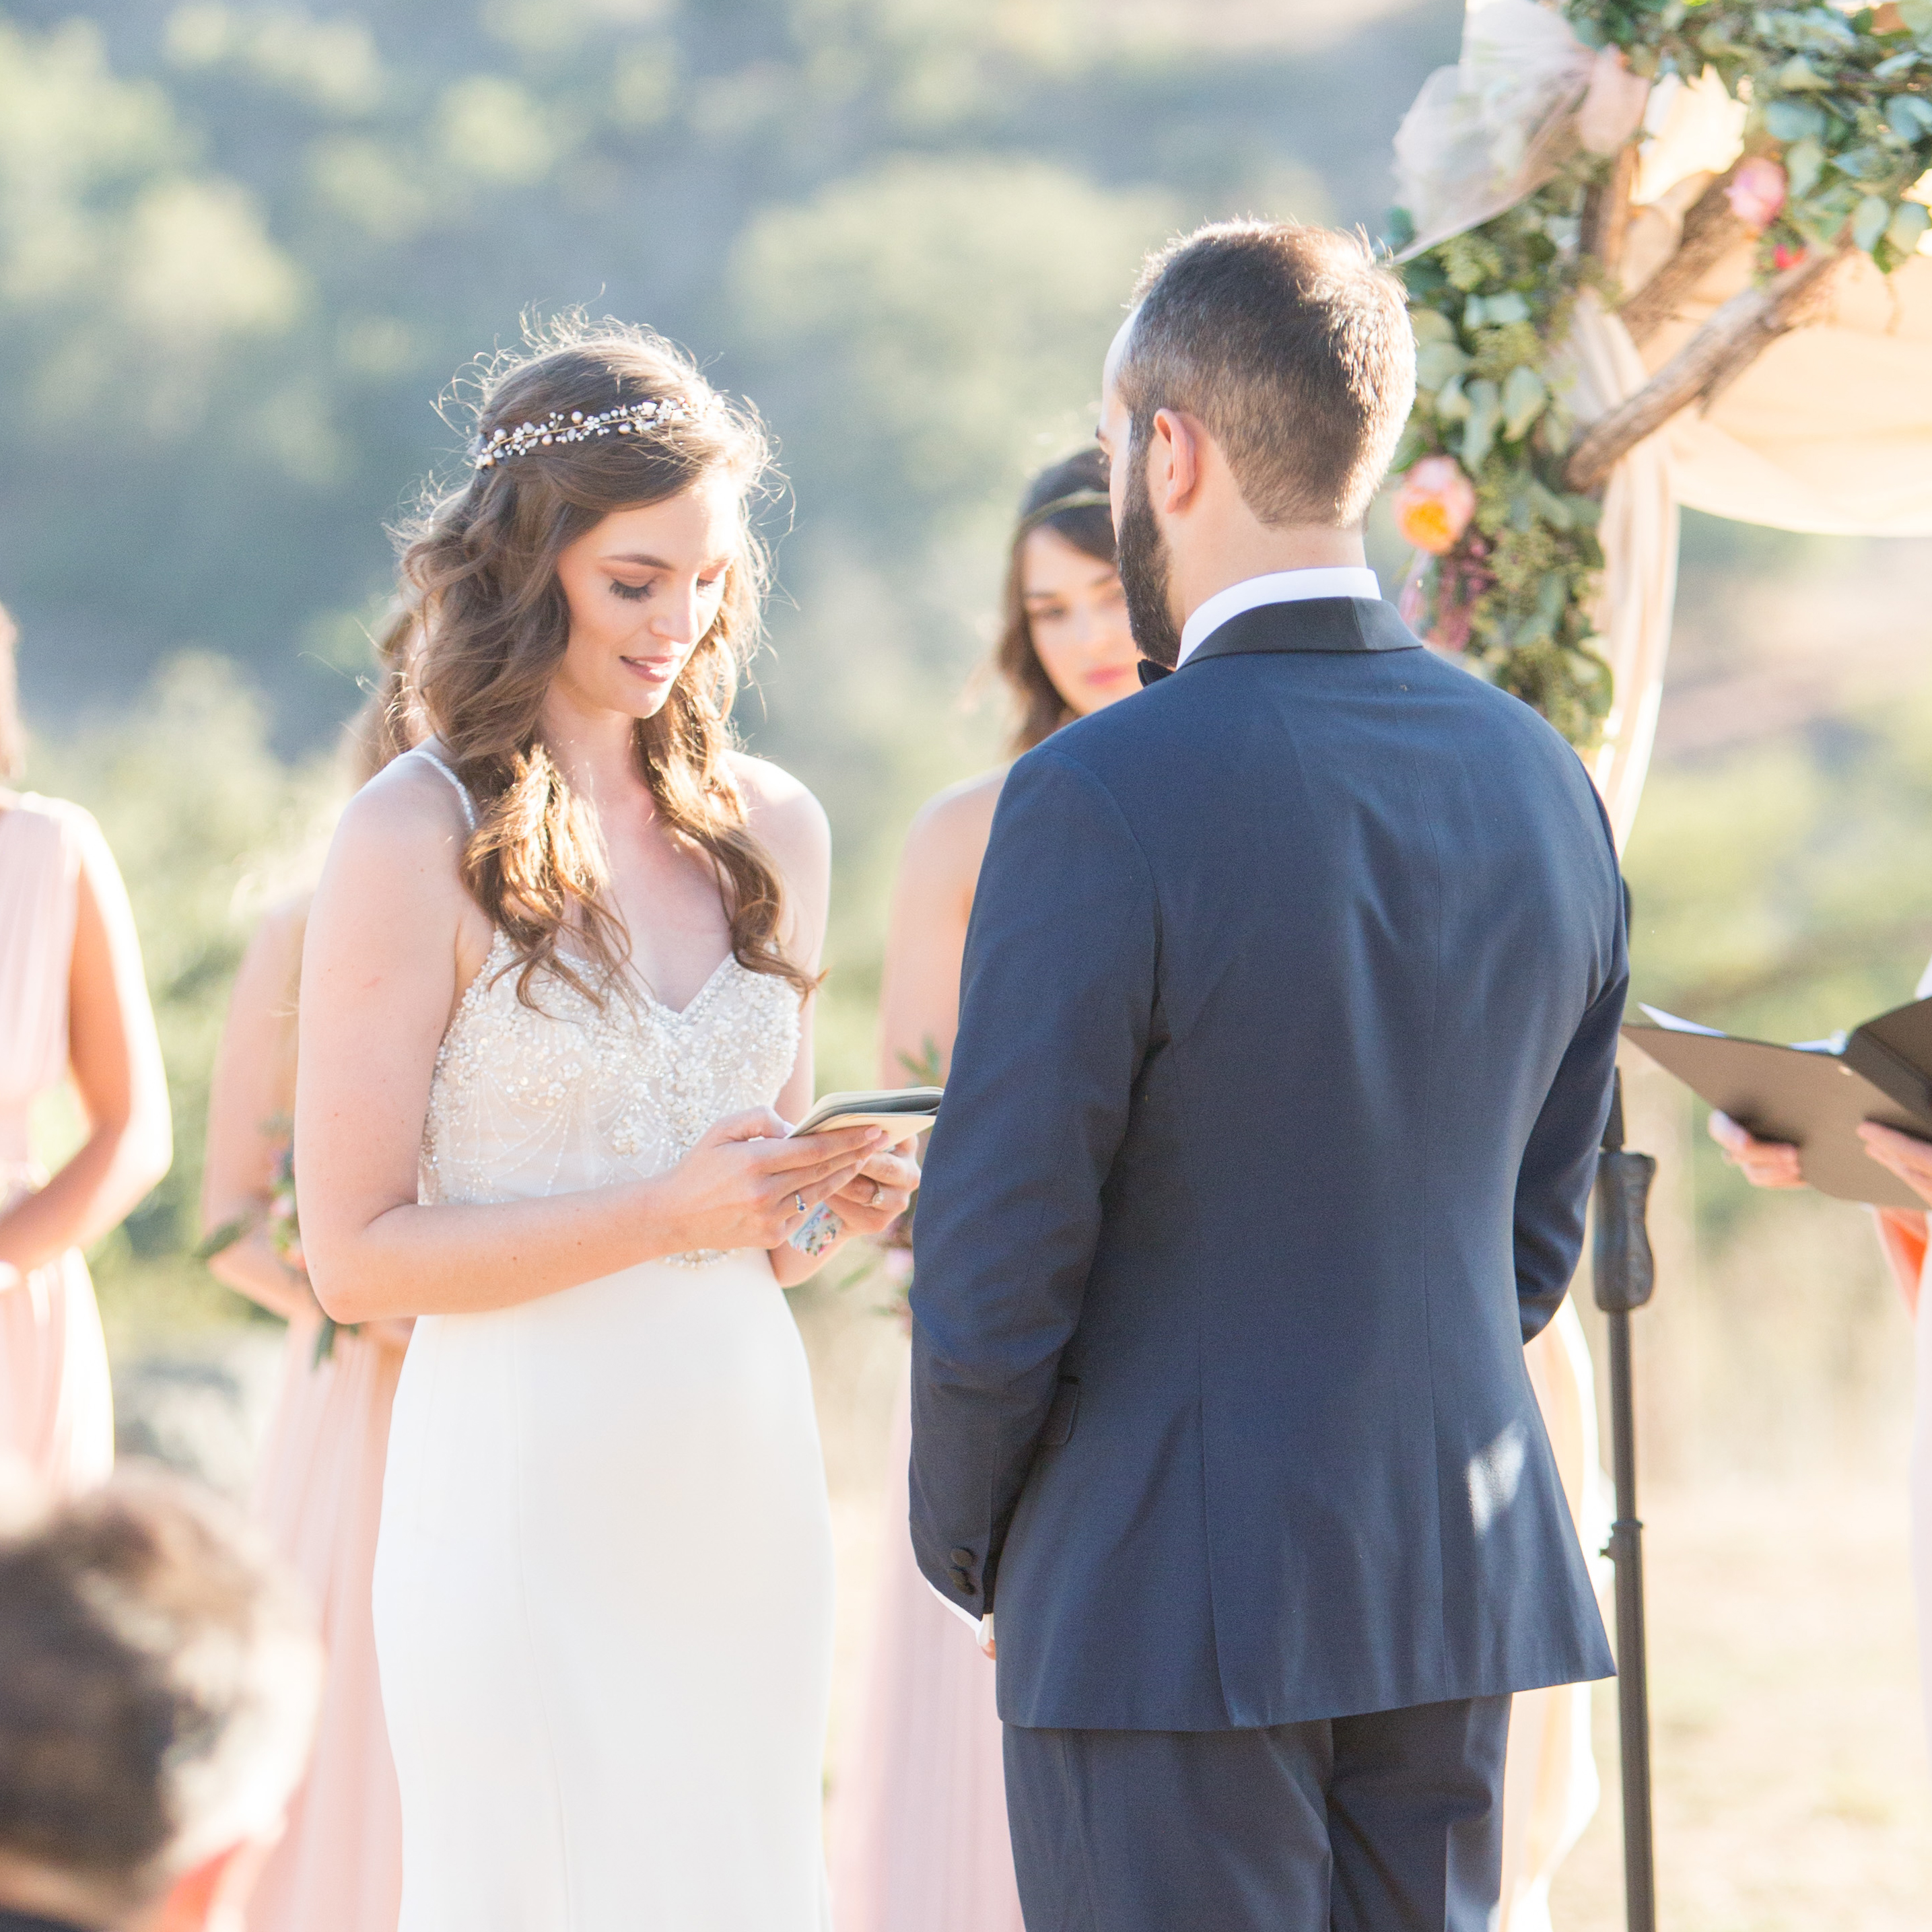 How To Shoot A Ceremony With the Sun Behind the Couple | For Photographers | Photography Tips & Tricks | Laura & Rachel Photography